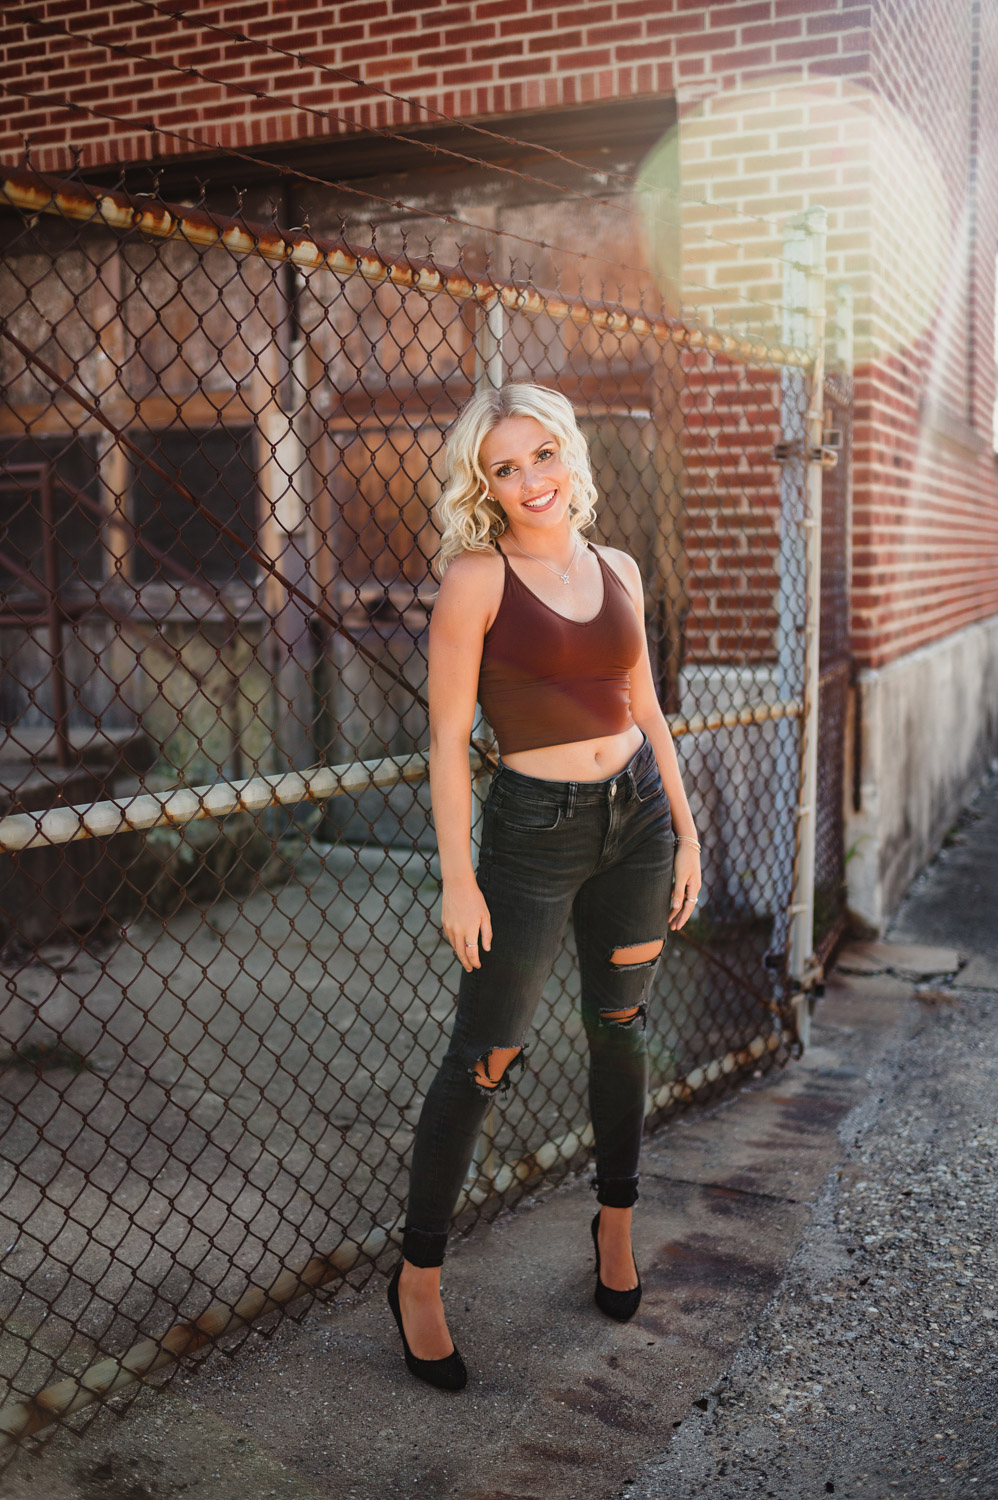 senior girl in standing pose in front of chain link fence outside of an urban warehouse